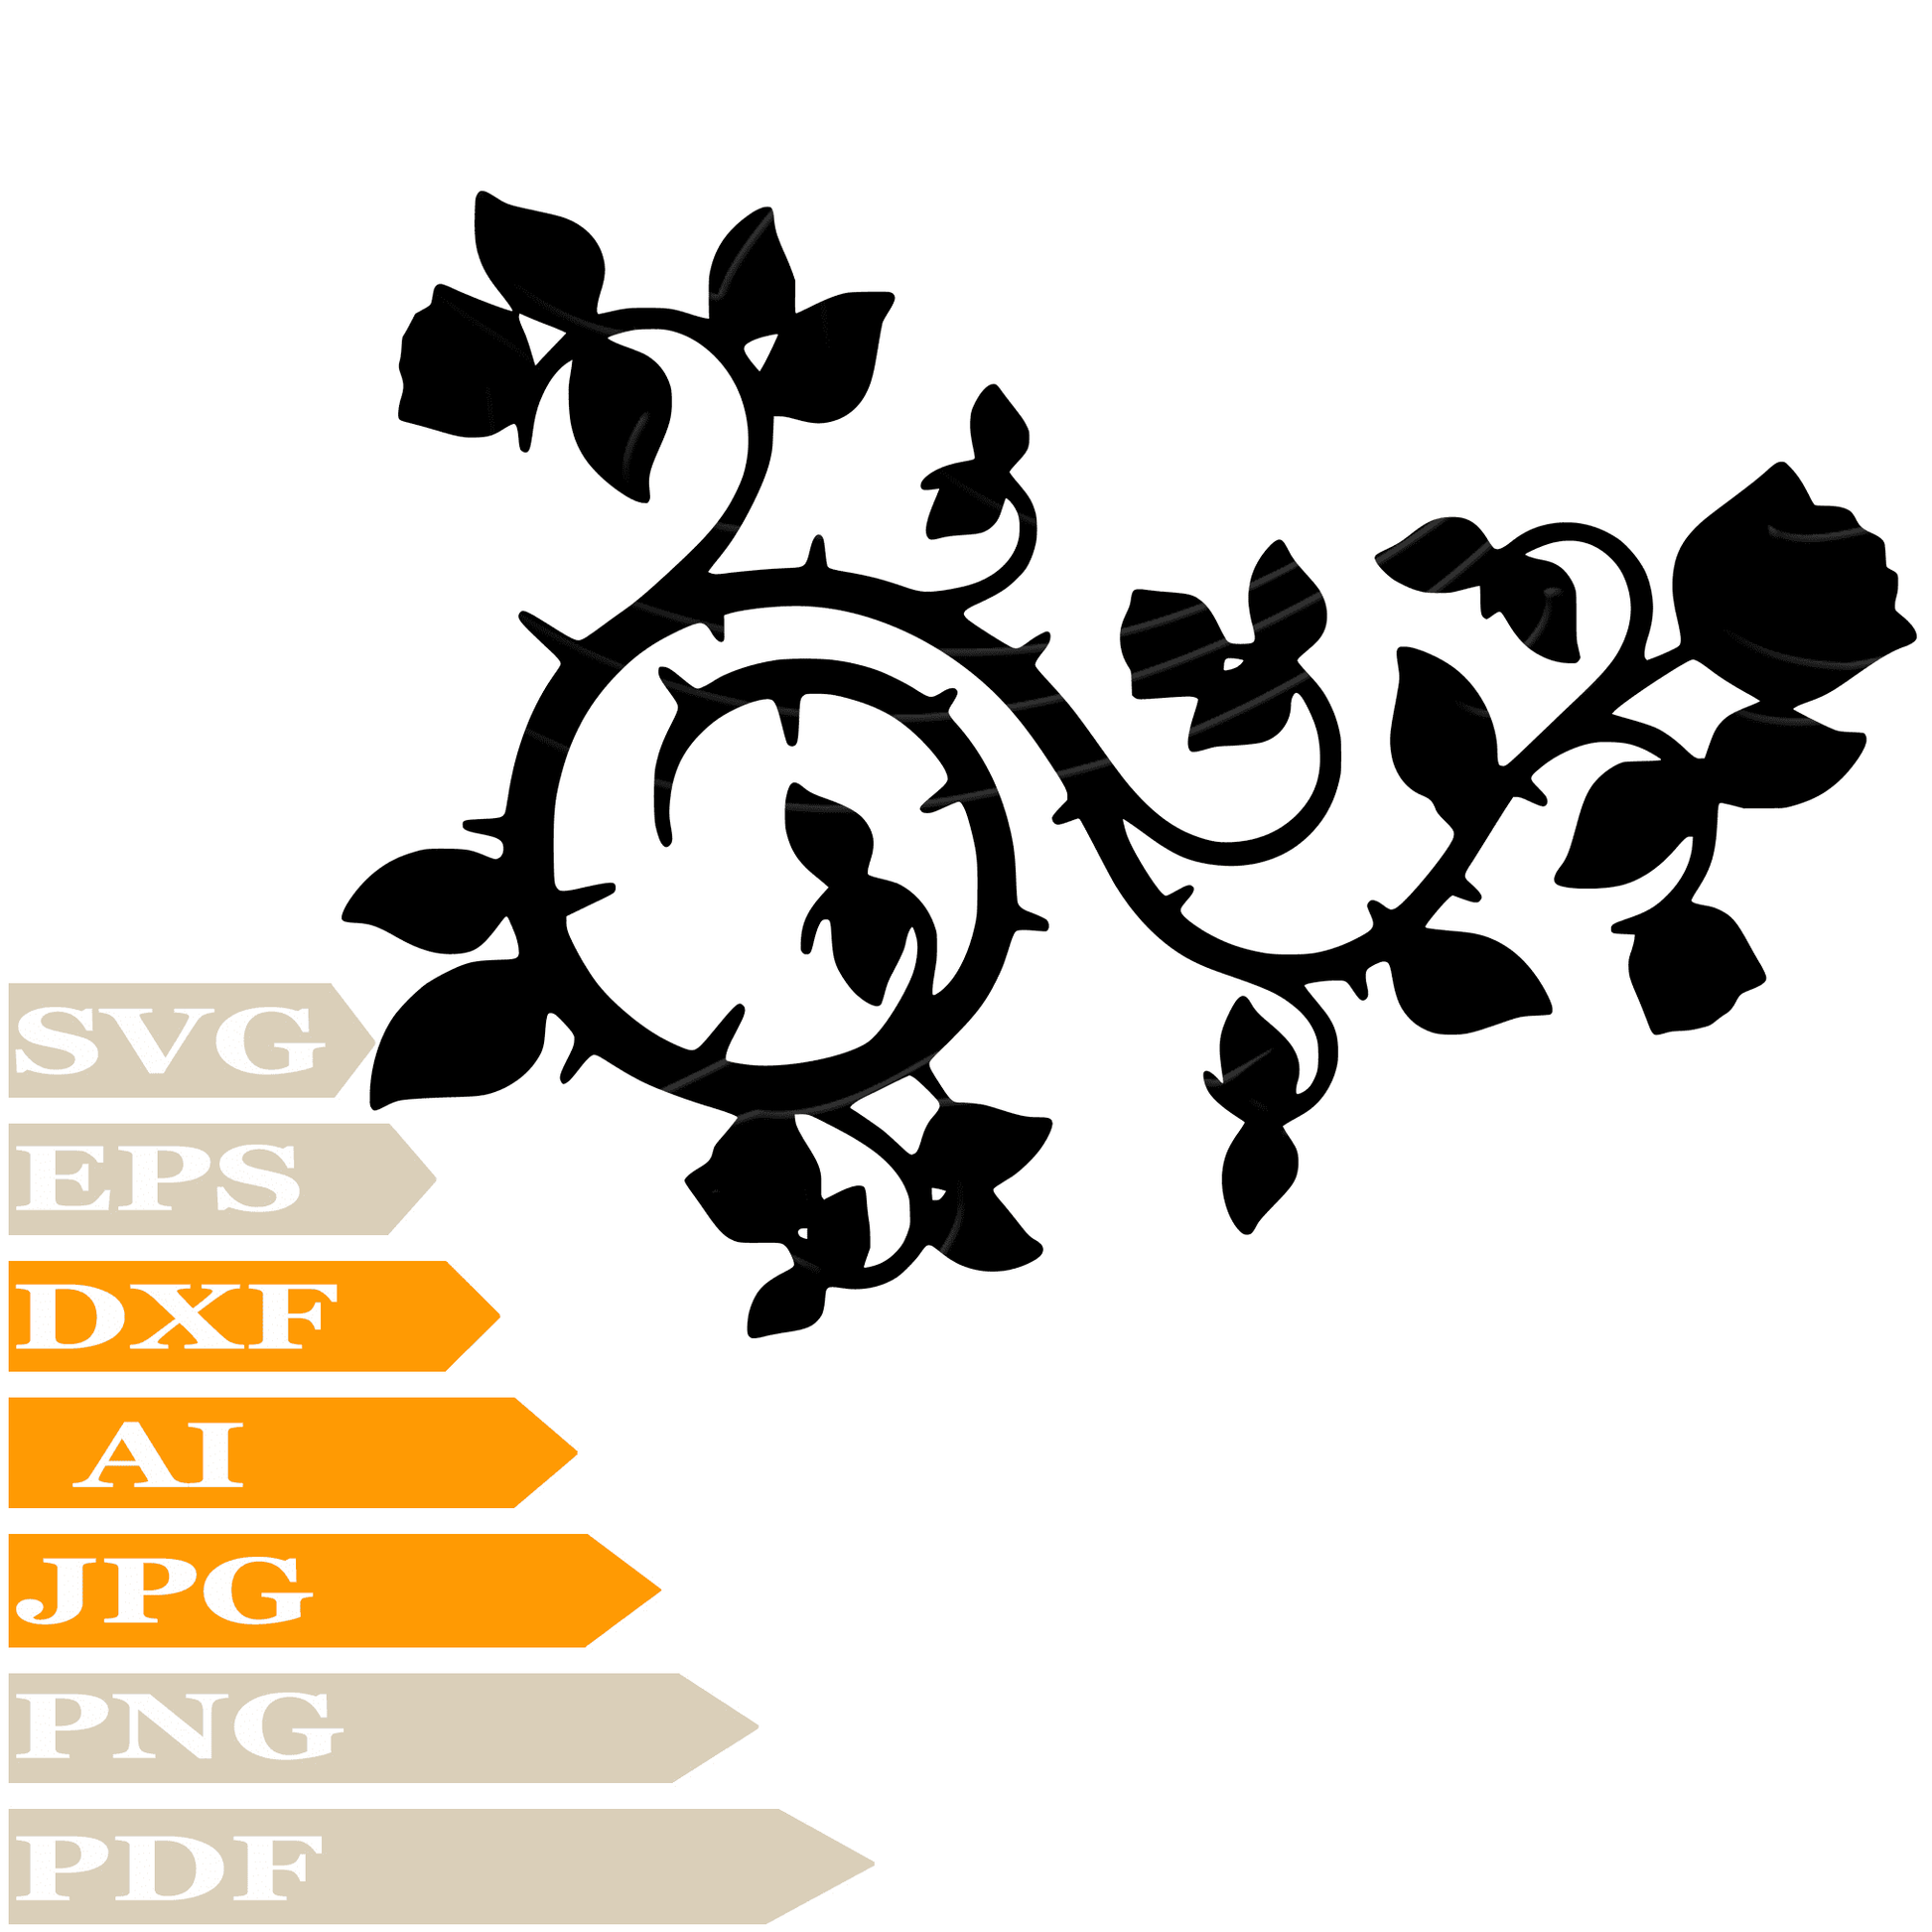 Rose SVG File-Flower Rose Personalized SVG-Rose Leaves Drawing SVG-Flower Rose Vector ClipArt's-SVG Cut Files-Illustration-PNG-Decal-Circuit-Digital Files-For Shirts-Silhouette